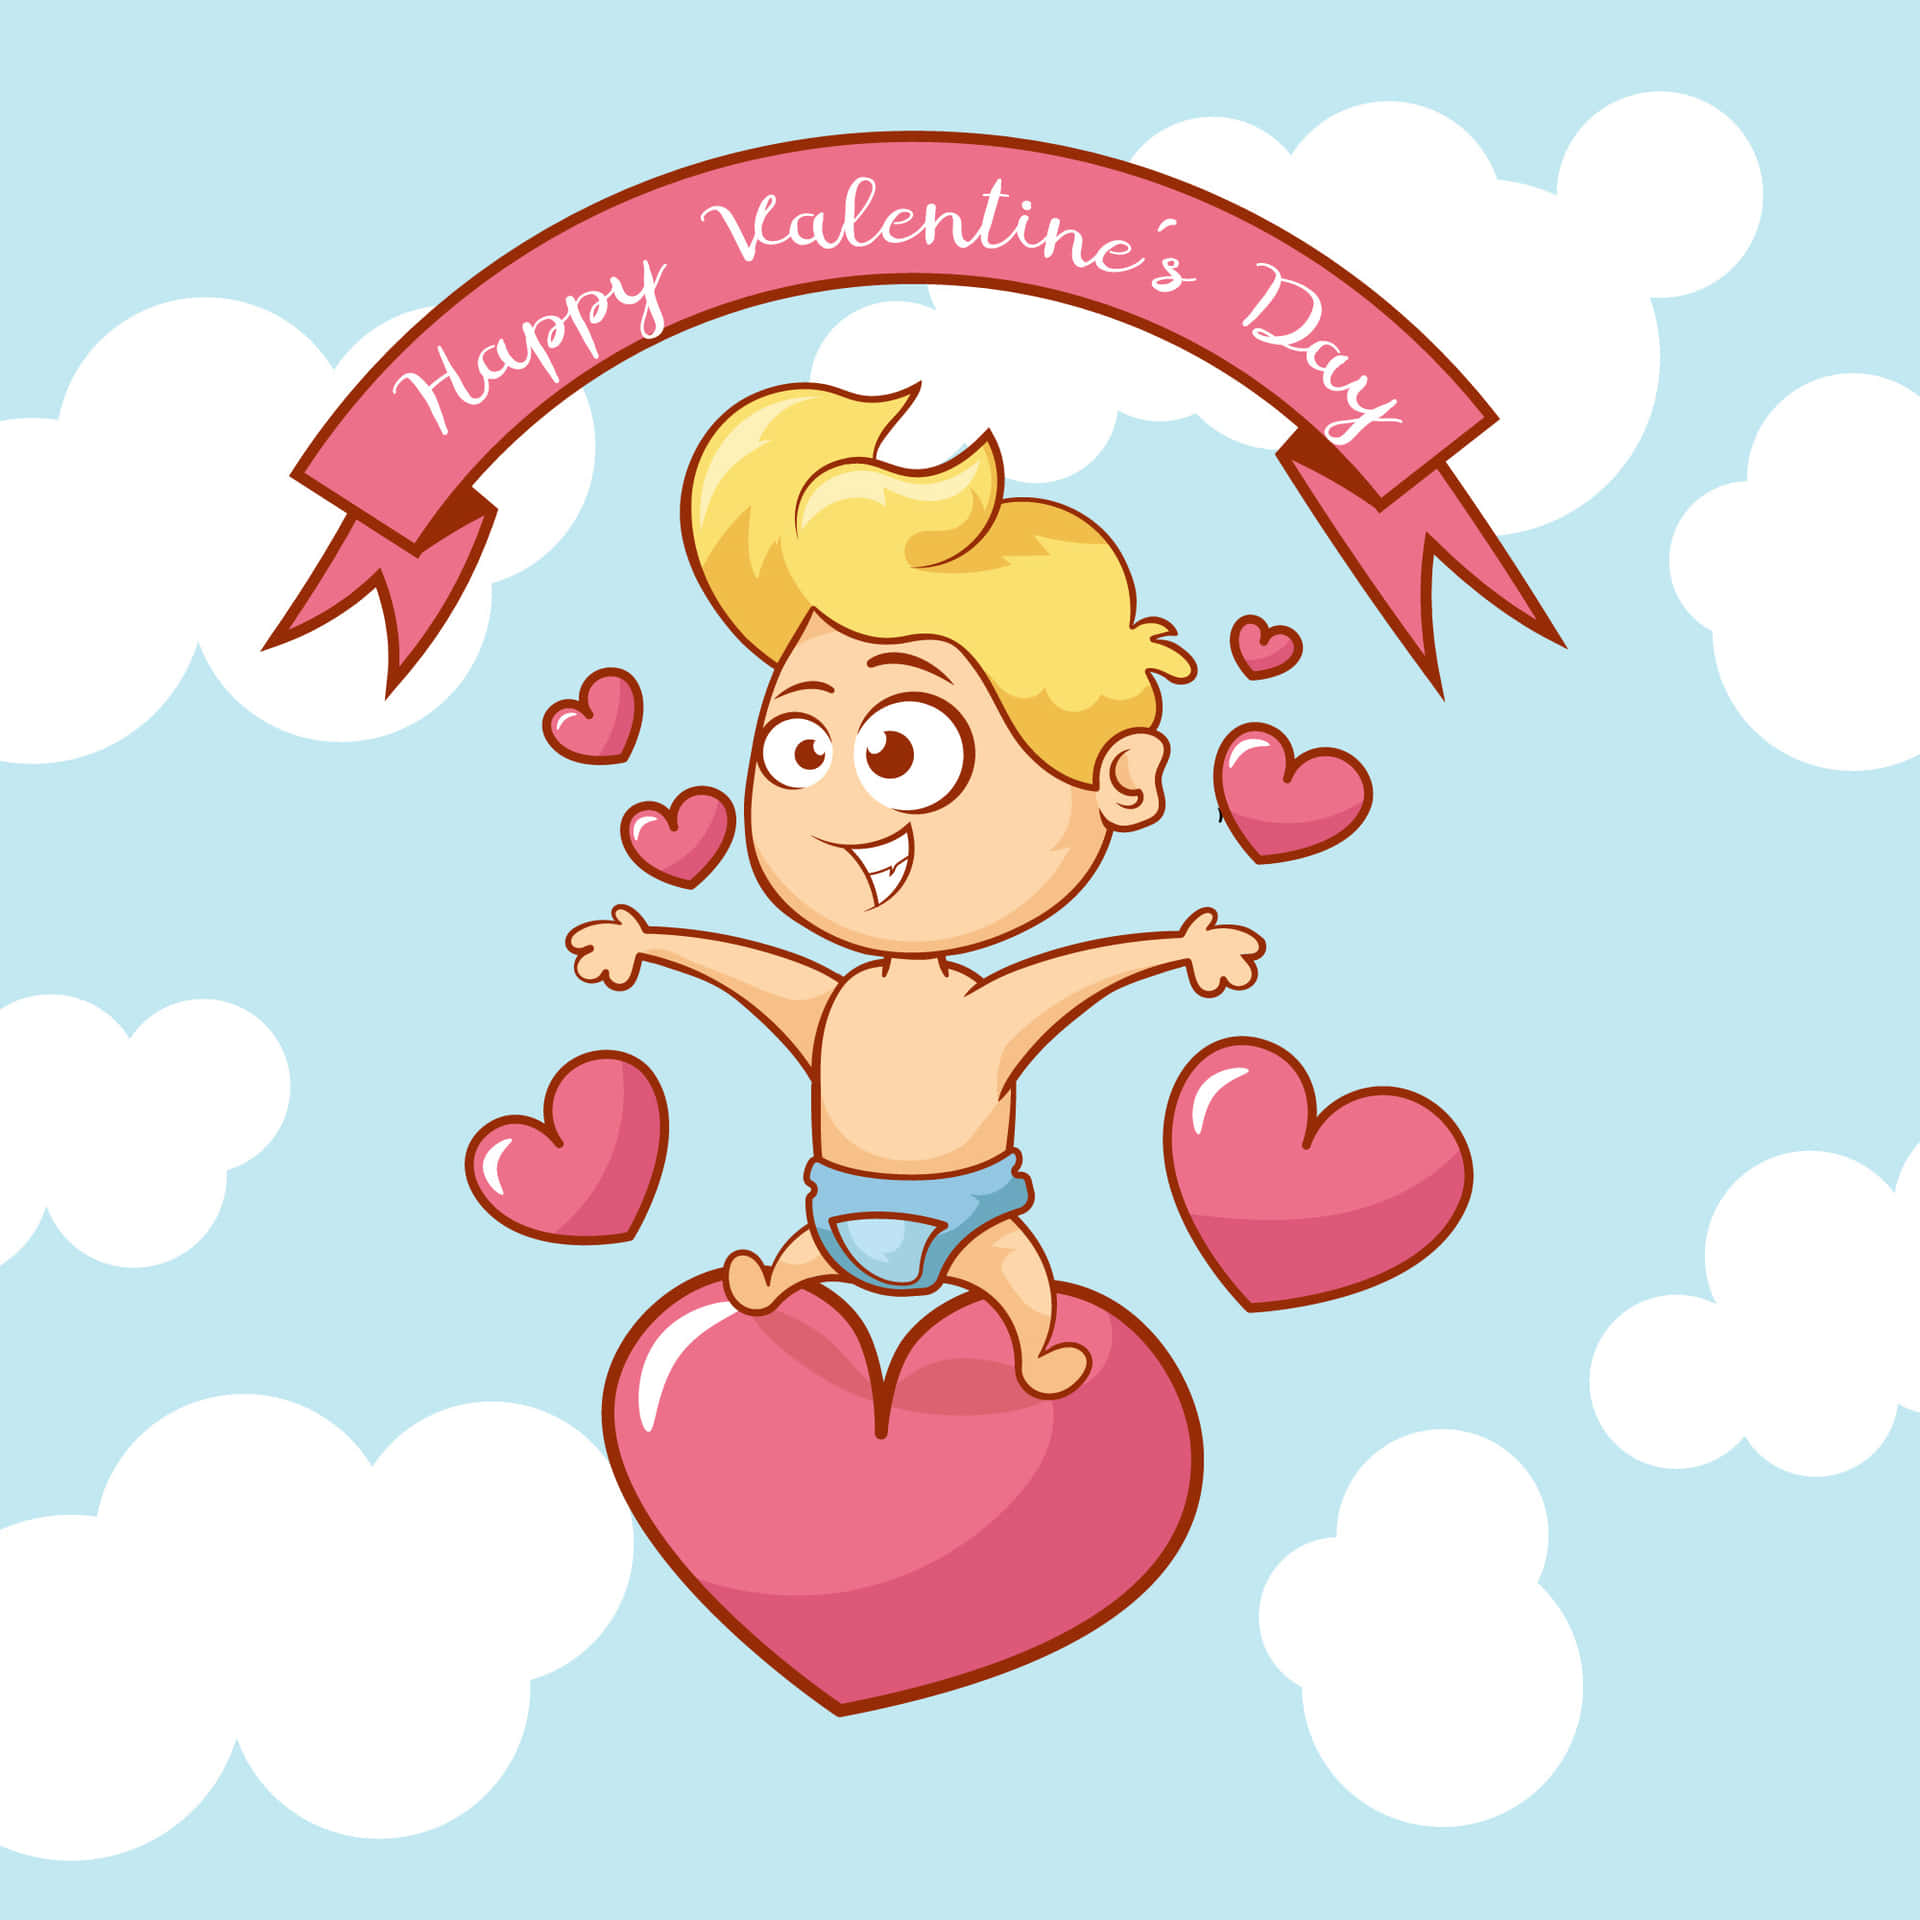 A Cartoon Boy Is Flying Over A Heart With A Banner